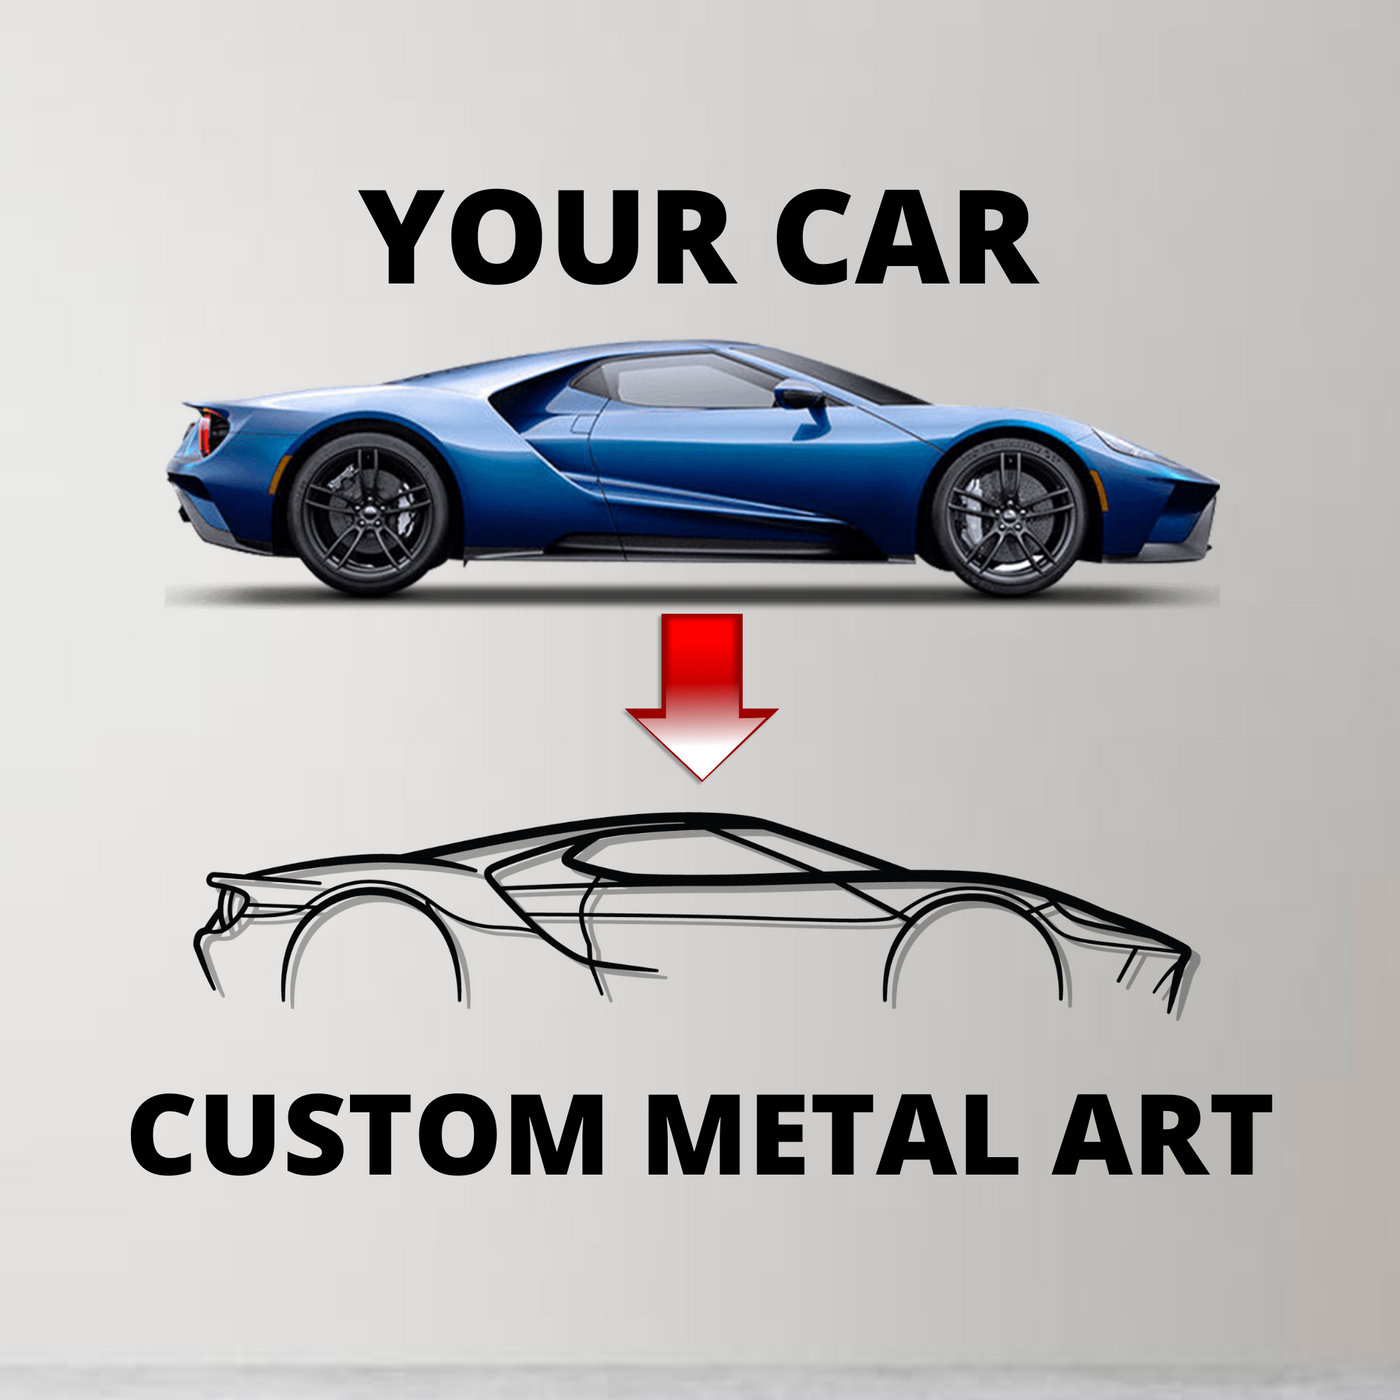 911 SC Group 4 Detailed Silhouette Metal Wall Art